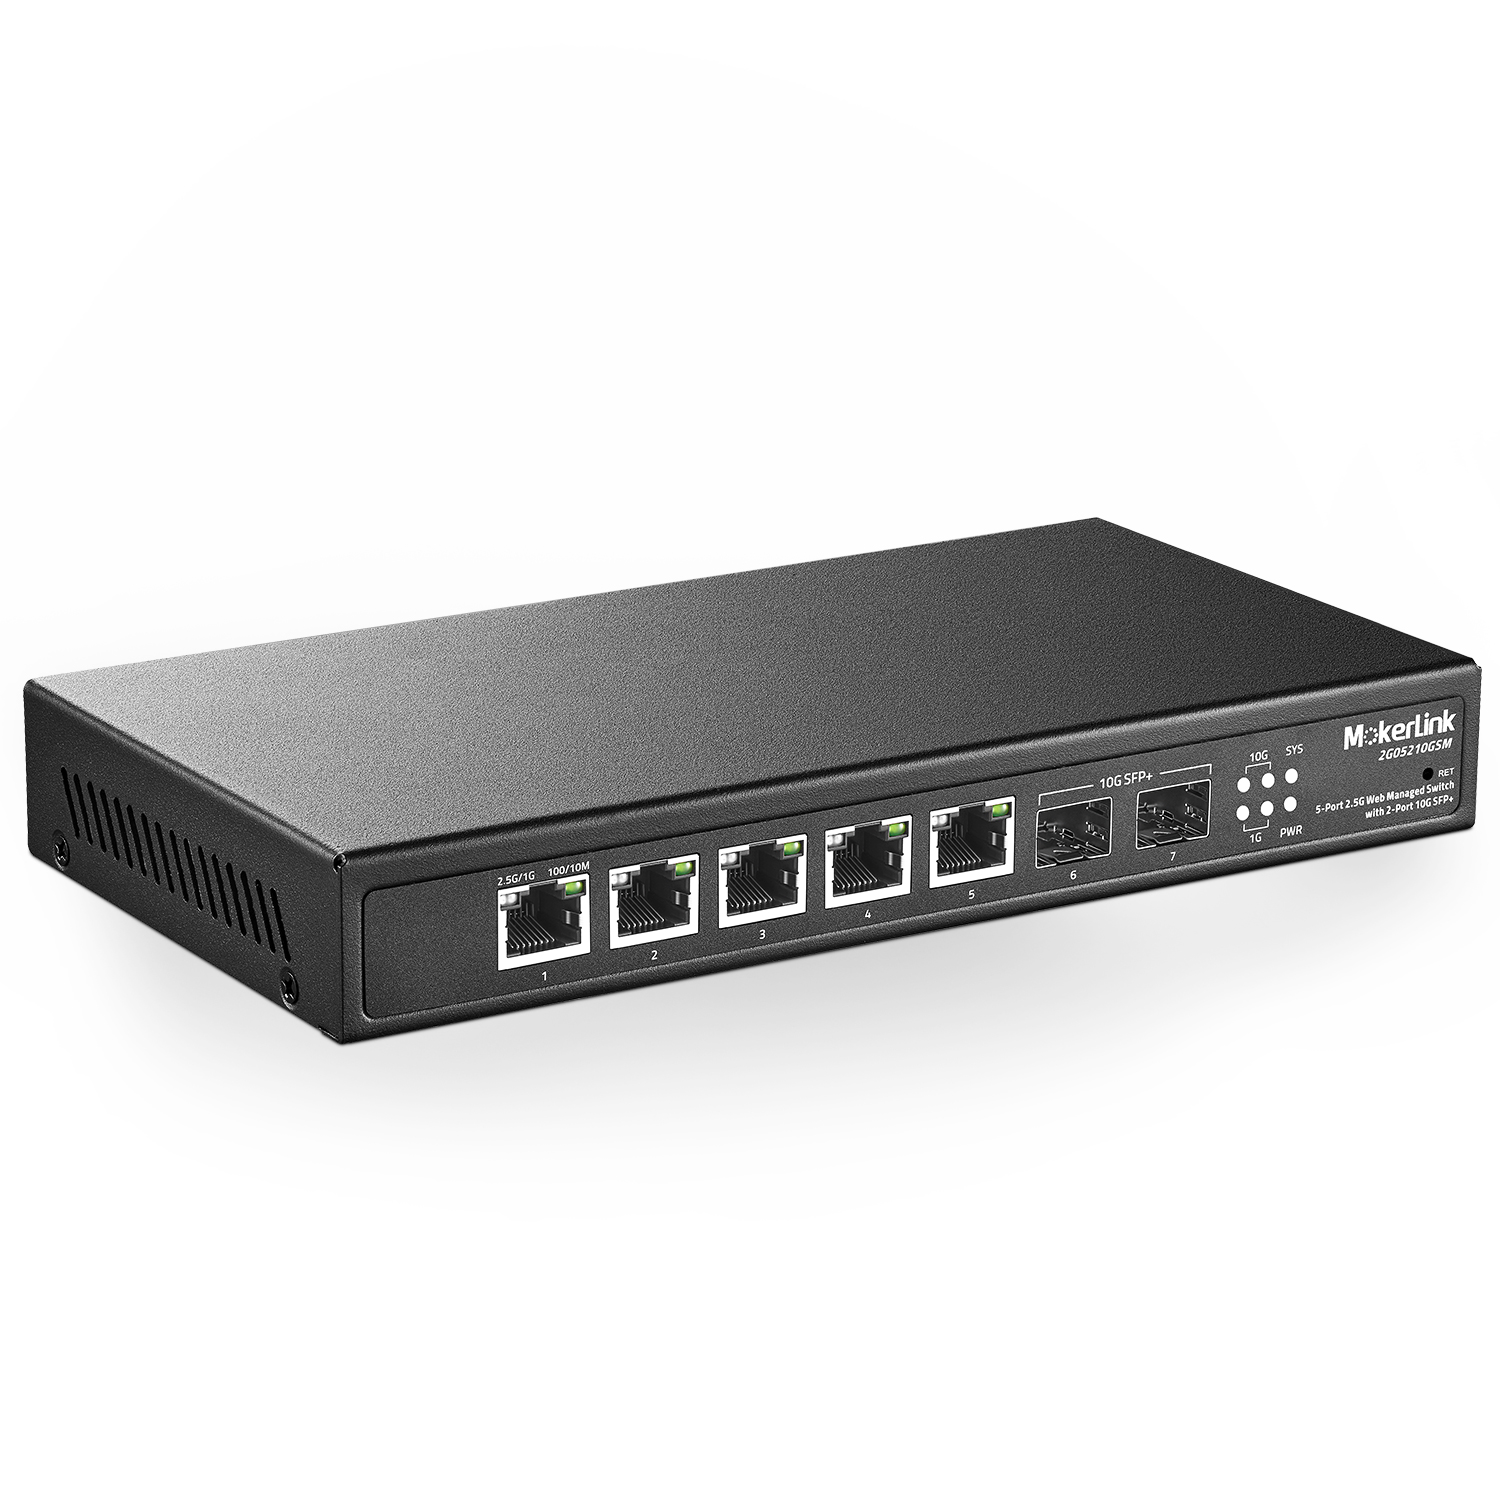 5 RJ45 2.5 Gigabit Switch Managed Layer 2 Switch With 1 10gbps SFP+